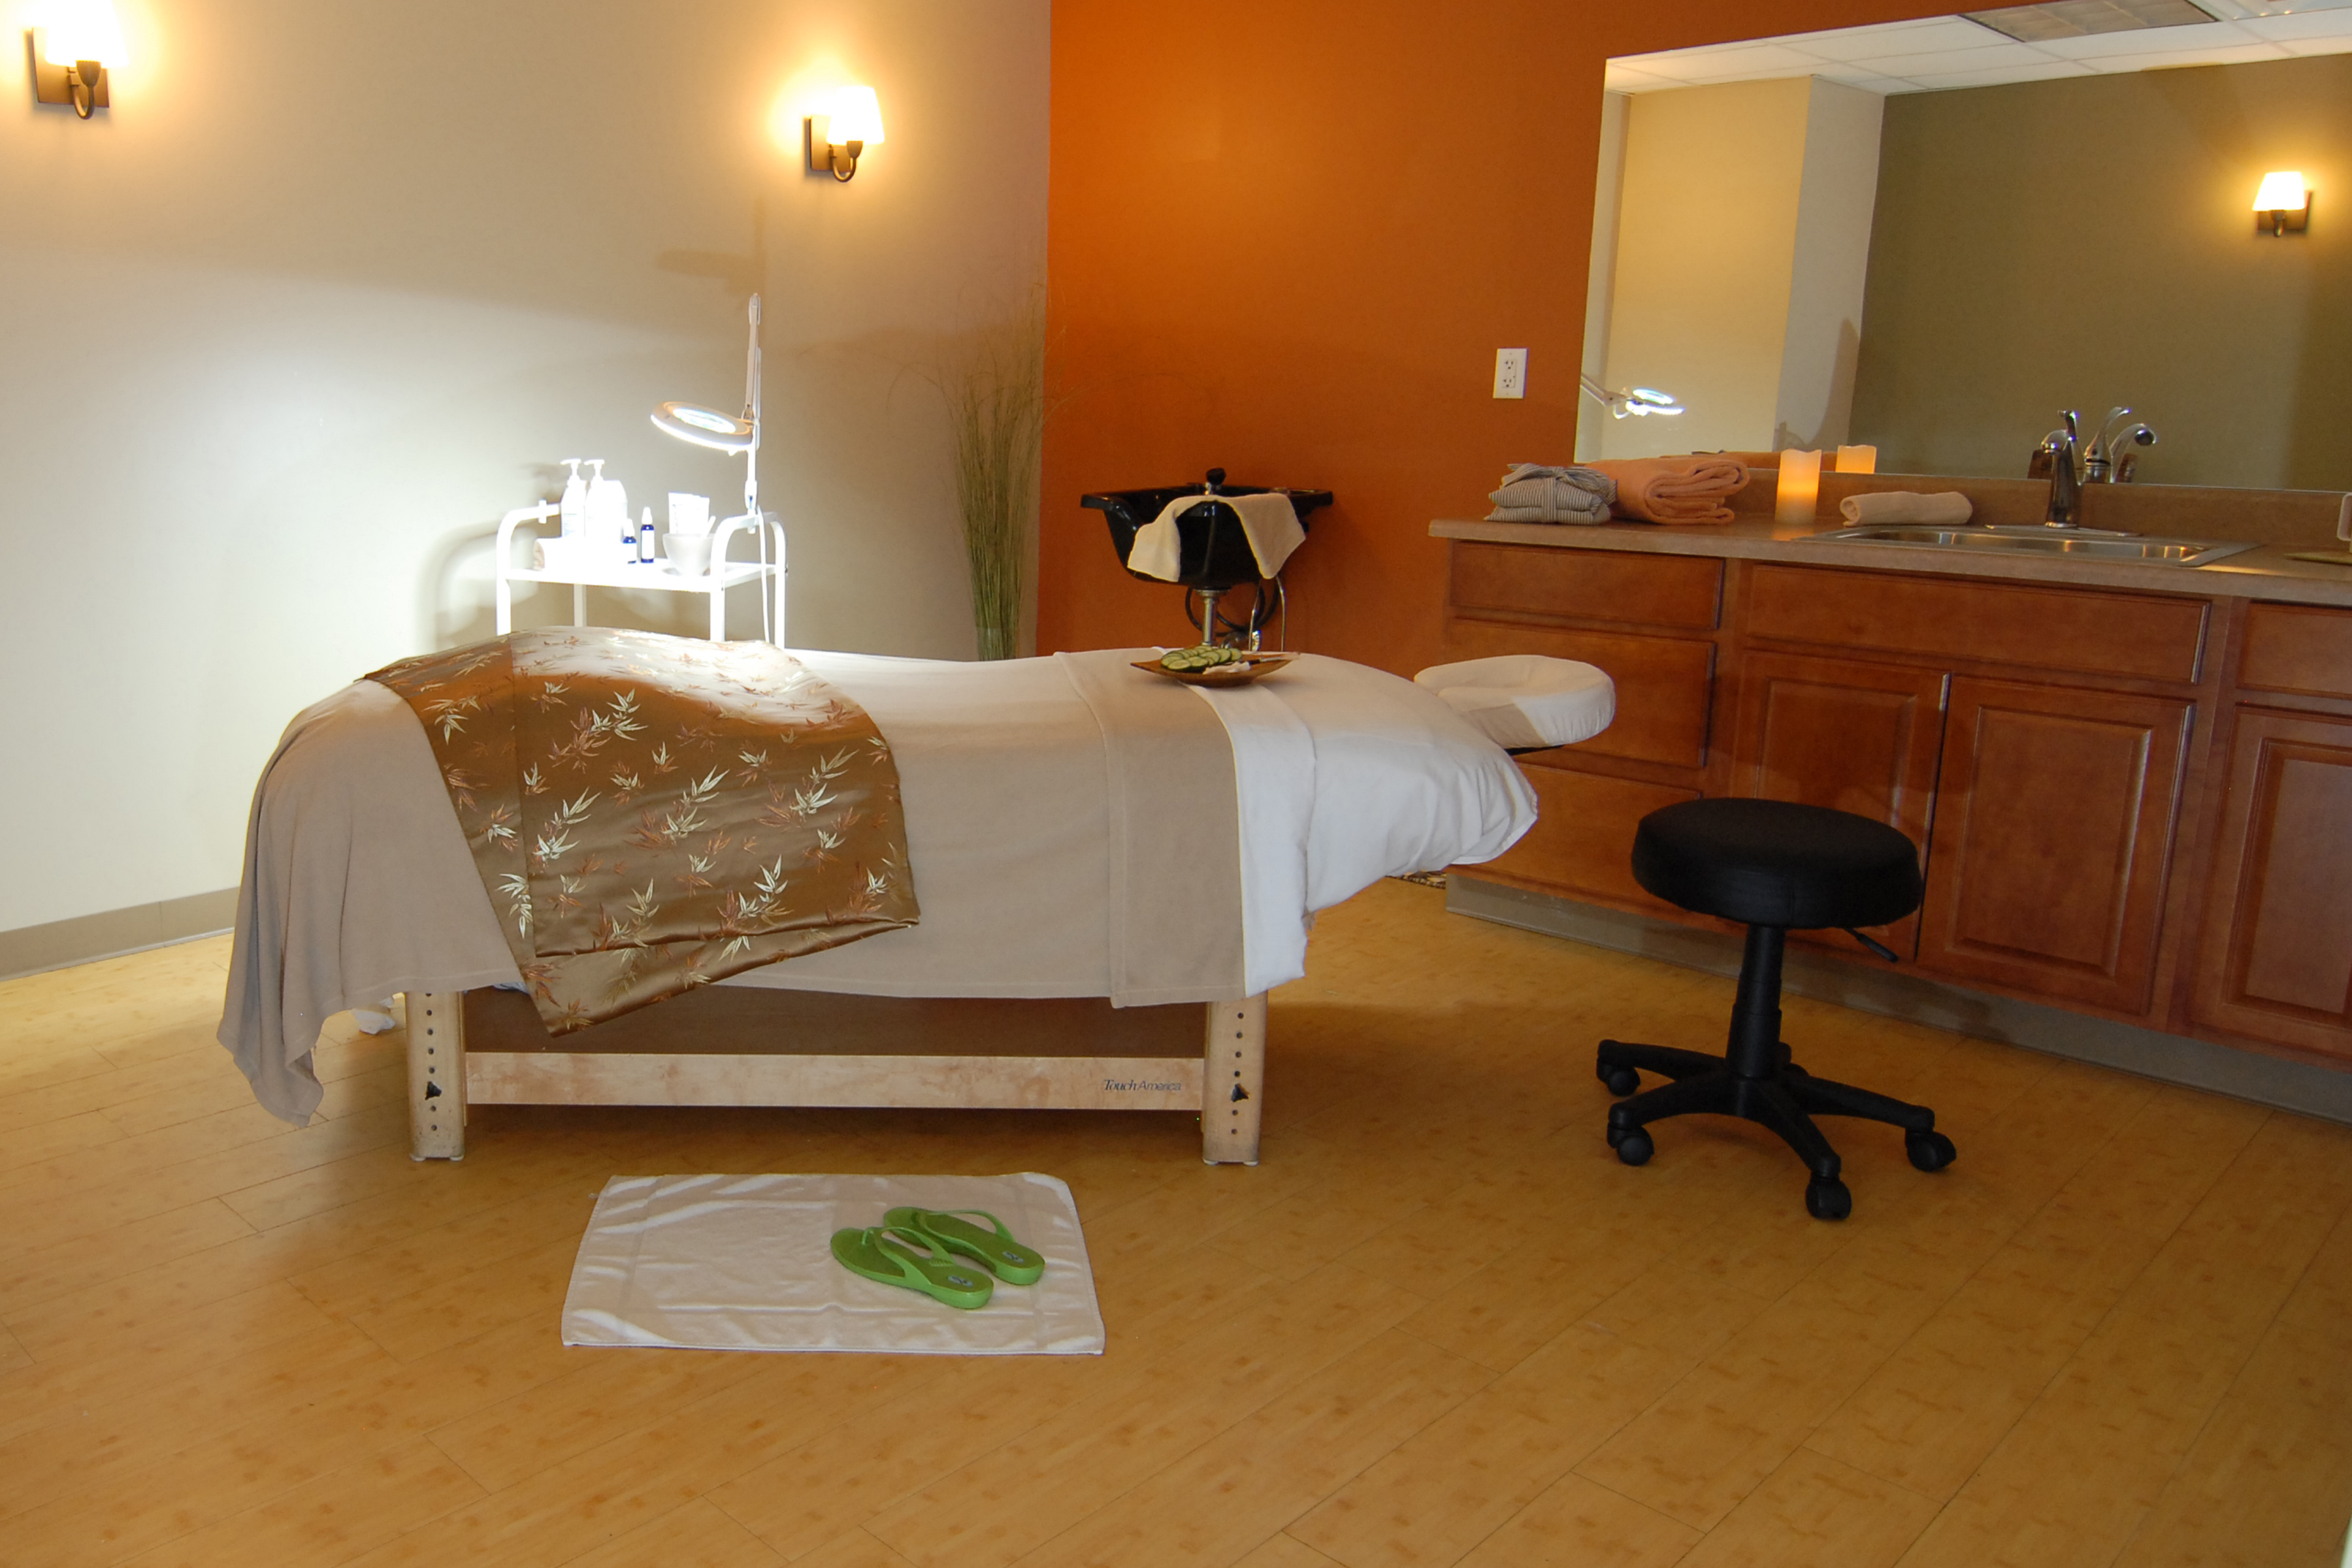 Balance Spa In Tewksbury Offers Aromatic Holiday Specials Northshore Magazine